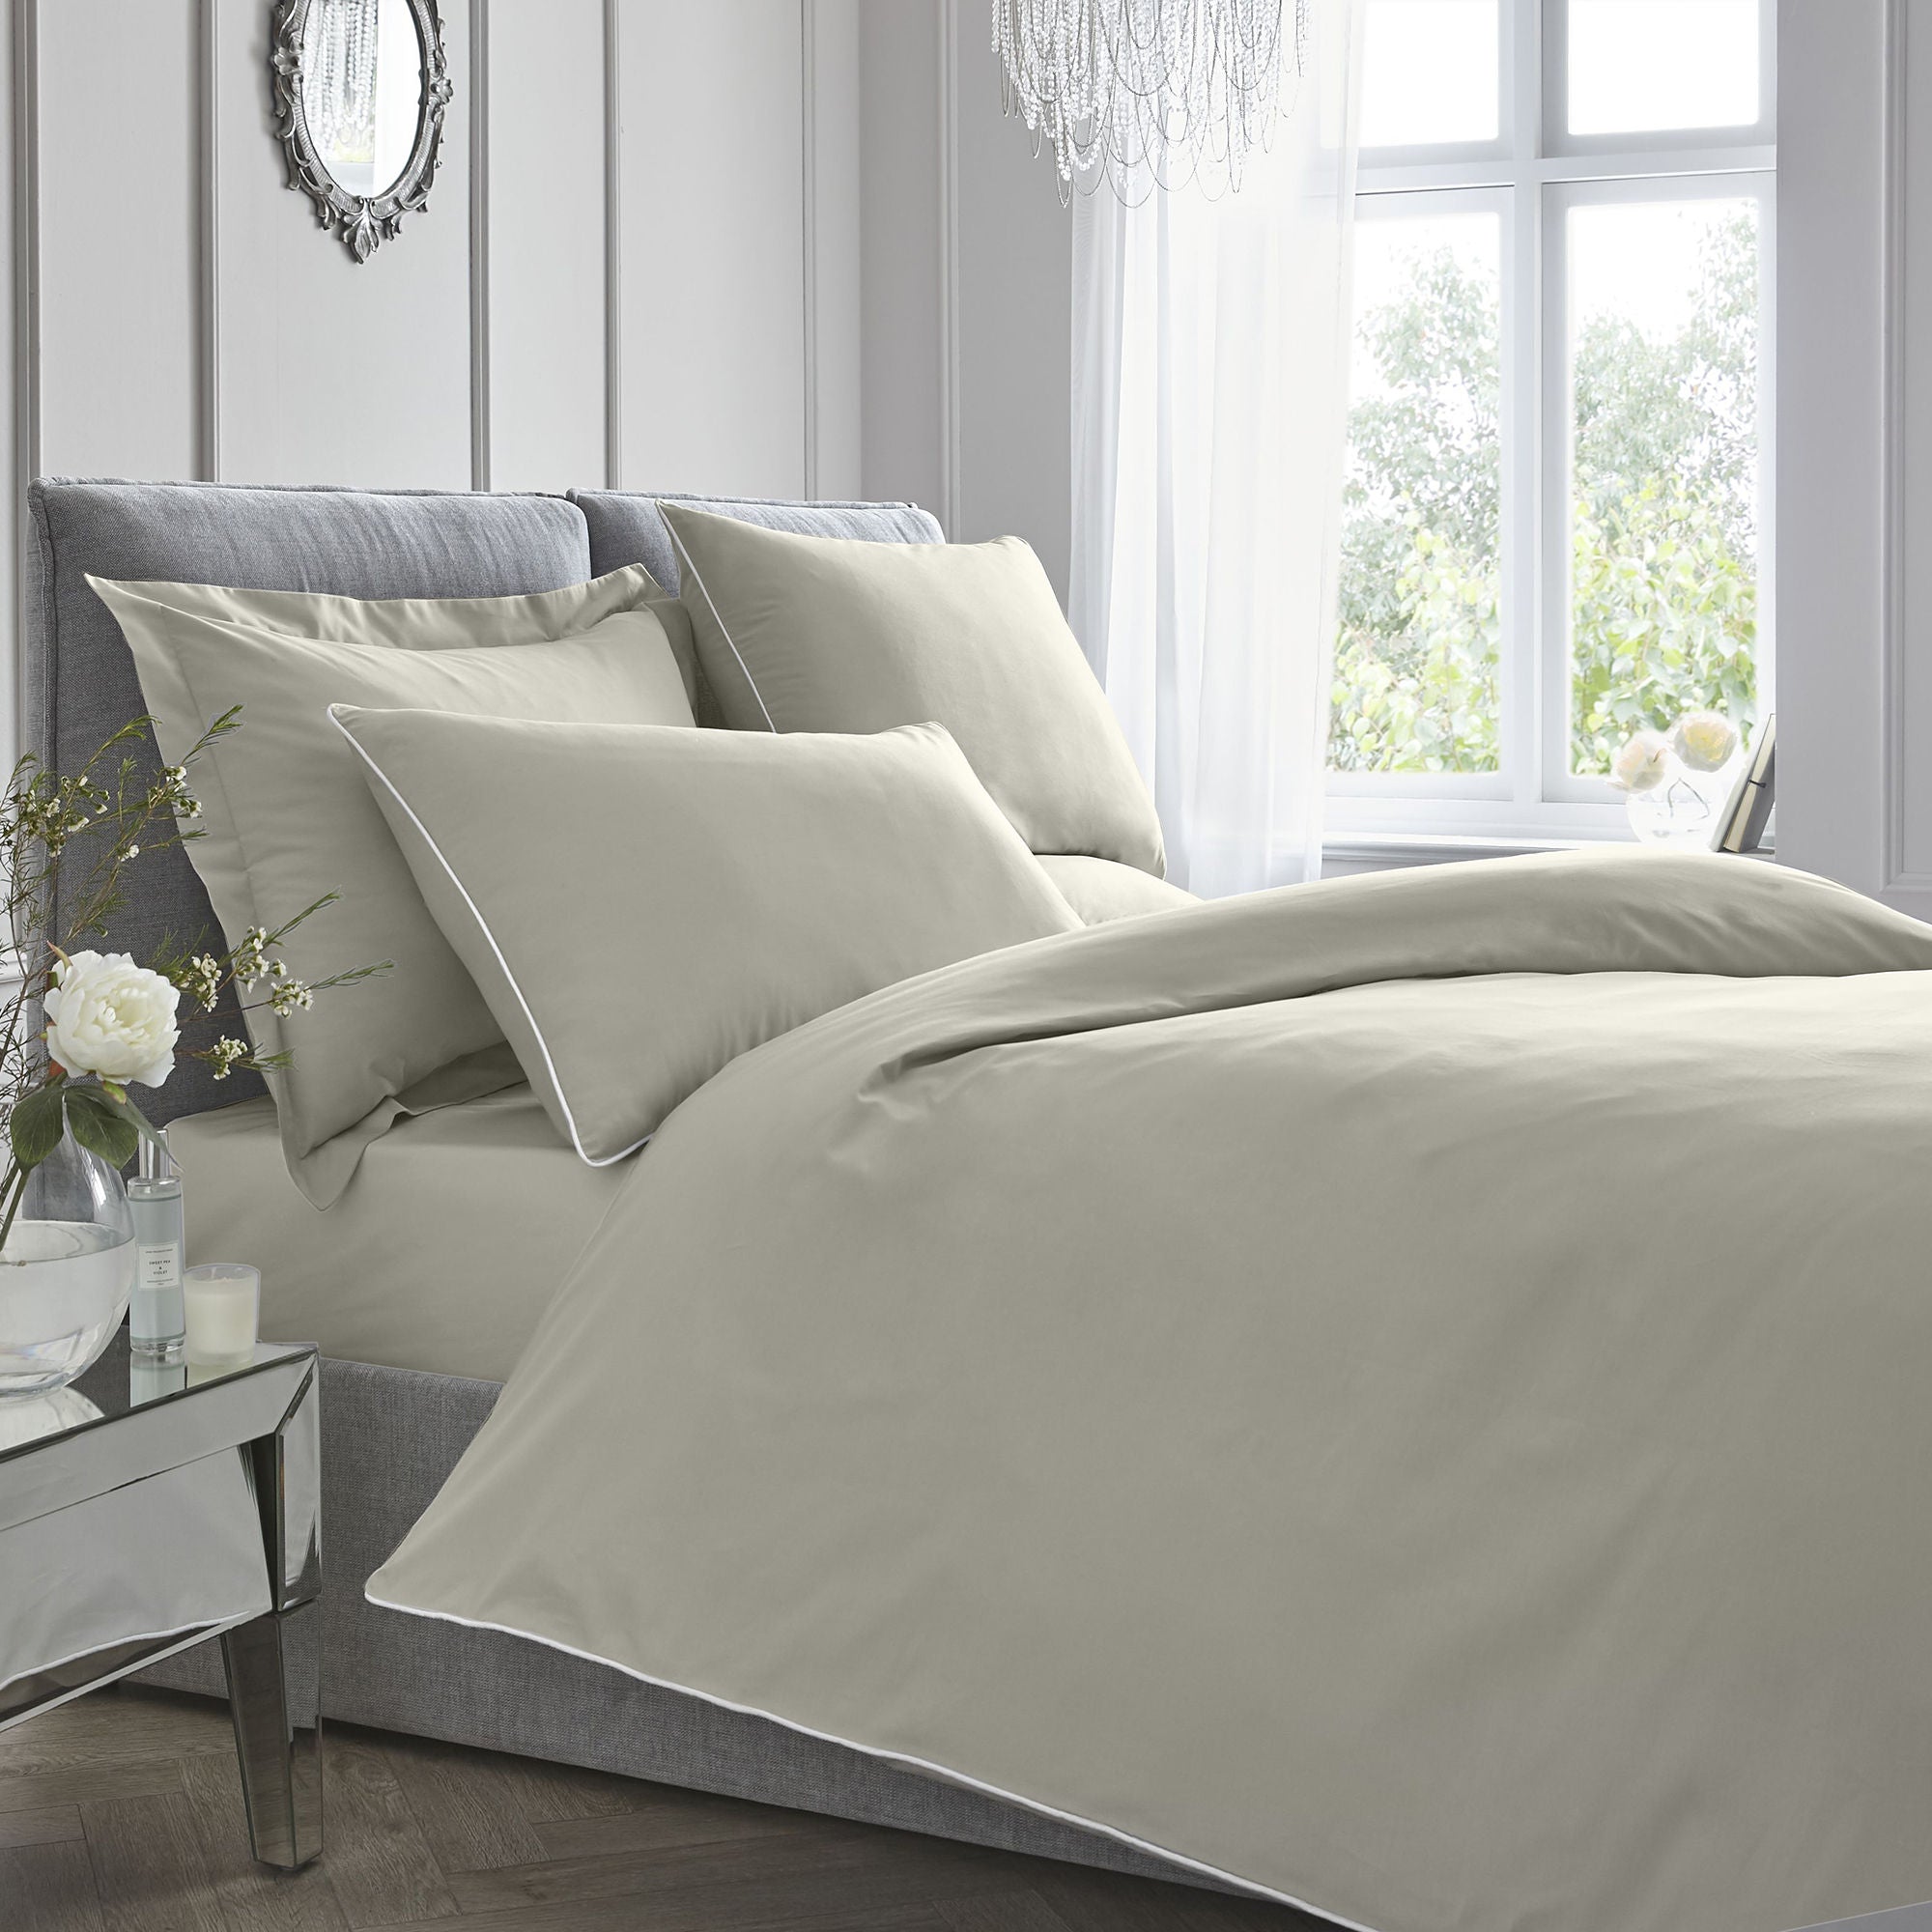 200TC Plain Dye Duvet Cover Set by Appletree Boutique in Silver with White Contrast Piping - Duvet Cover Set - Appletree Boutique